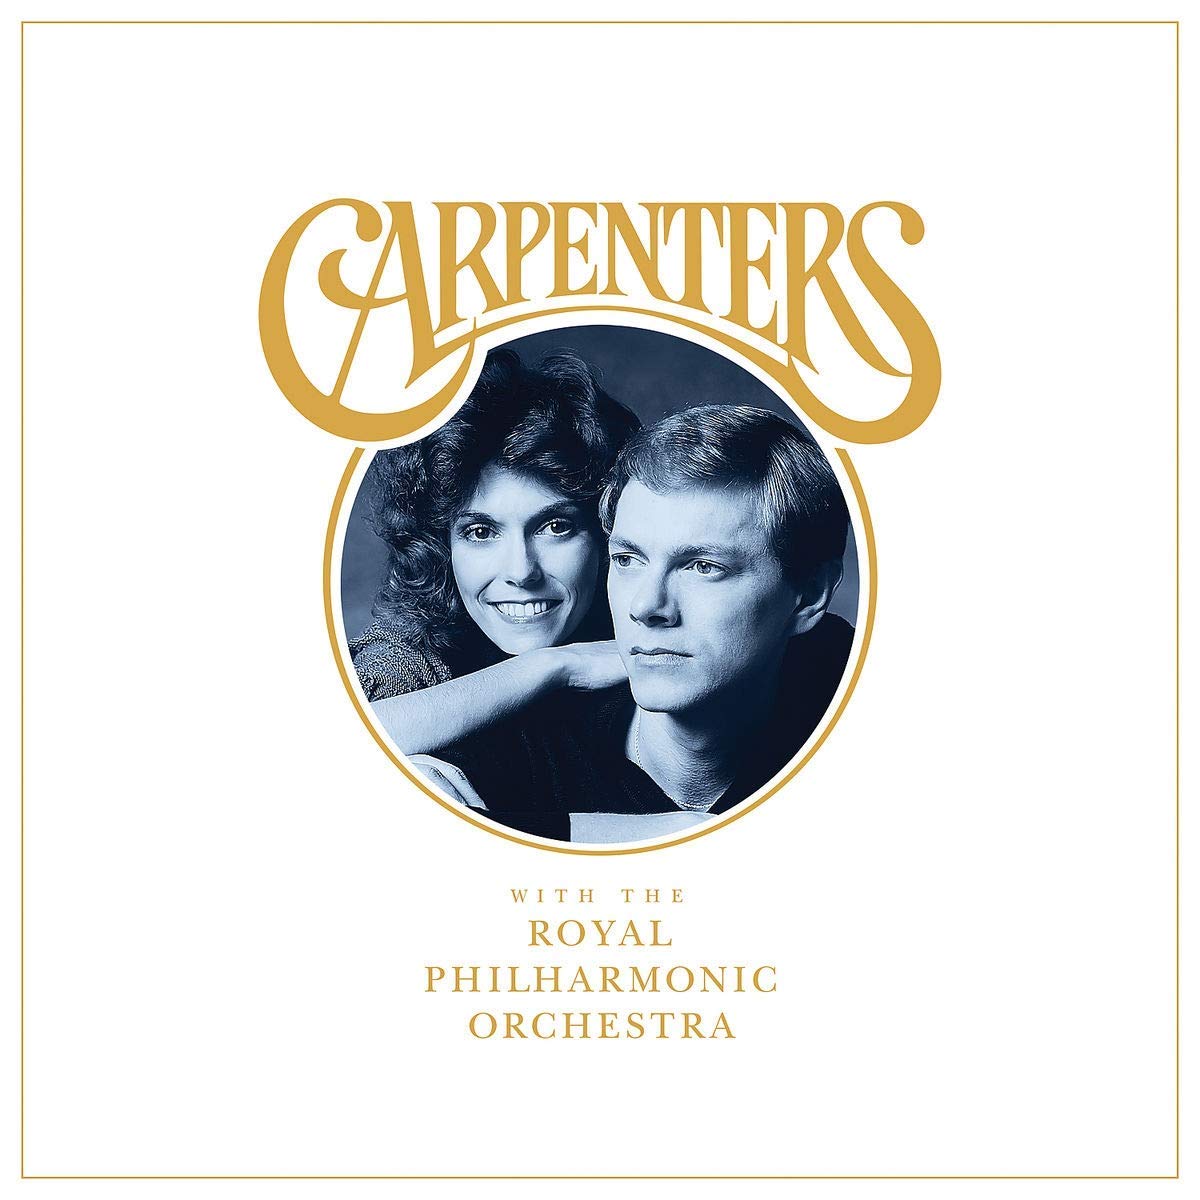 CARPENTERS / カーペンターズ / CARPENTERS WITH THE ROYAL PHILHARMONIC ORCHESTRA (CD)